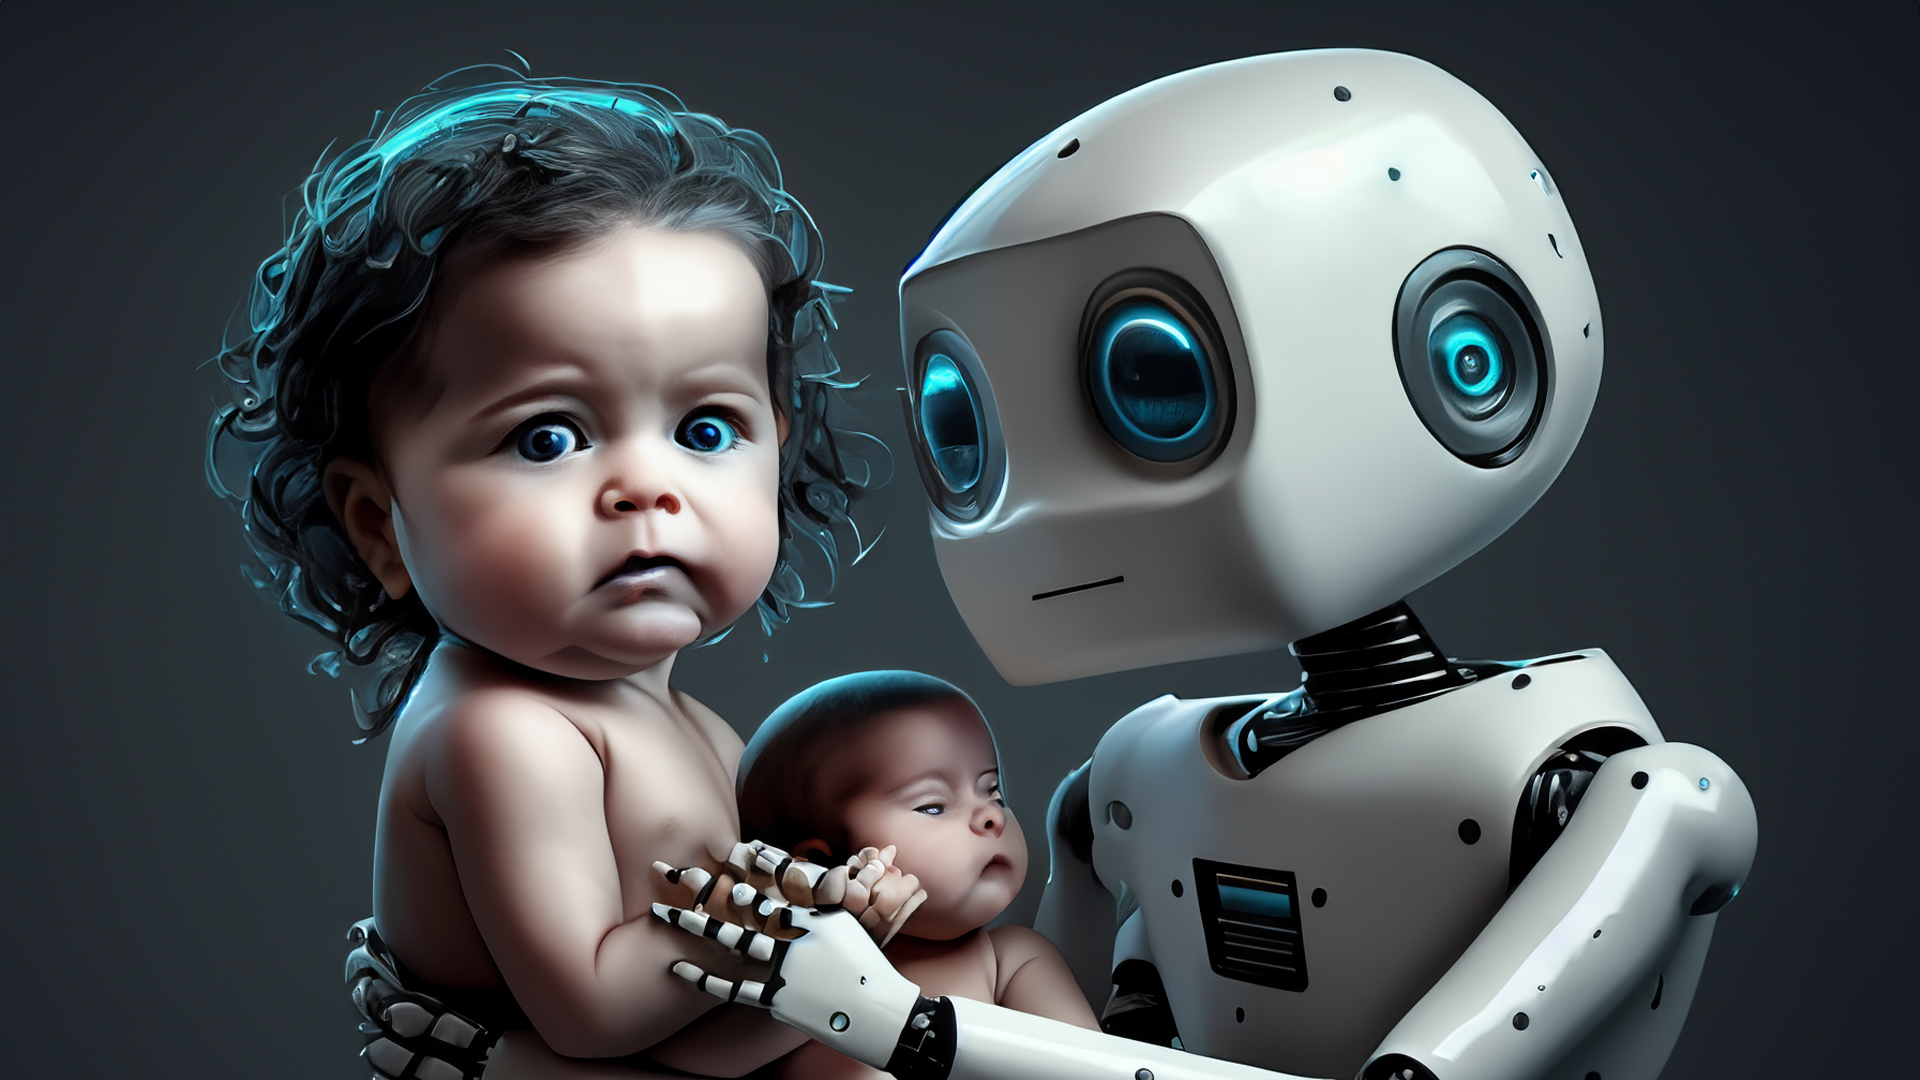 Sorry, Elon, nobody wants your robot babysitting their kids